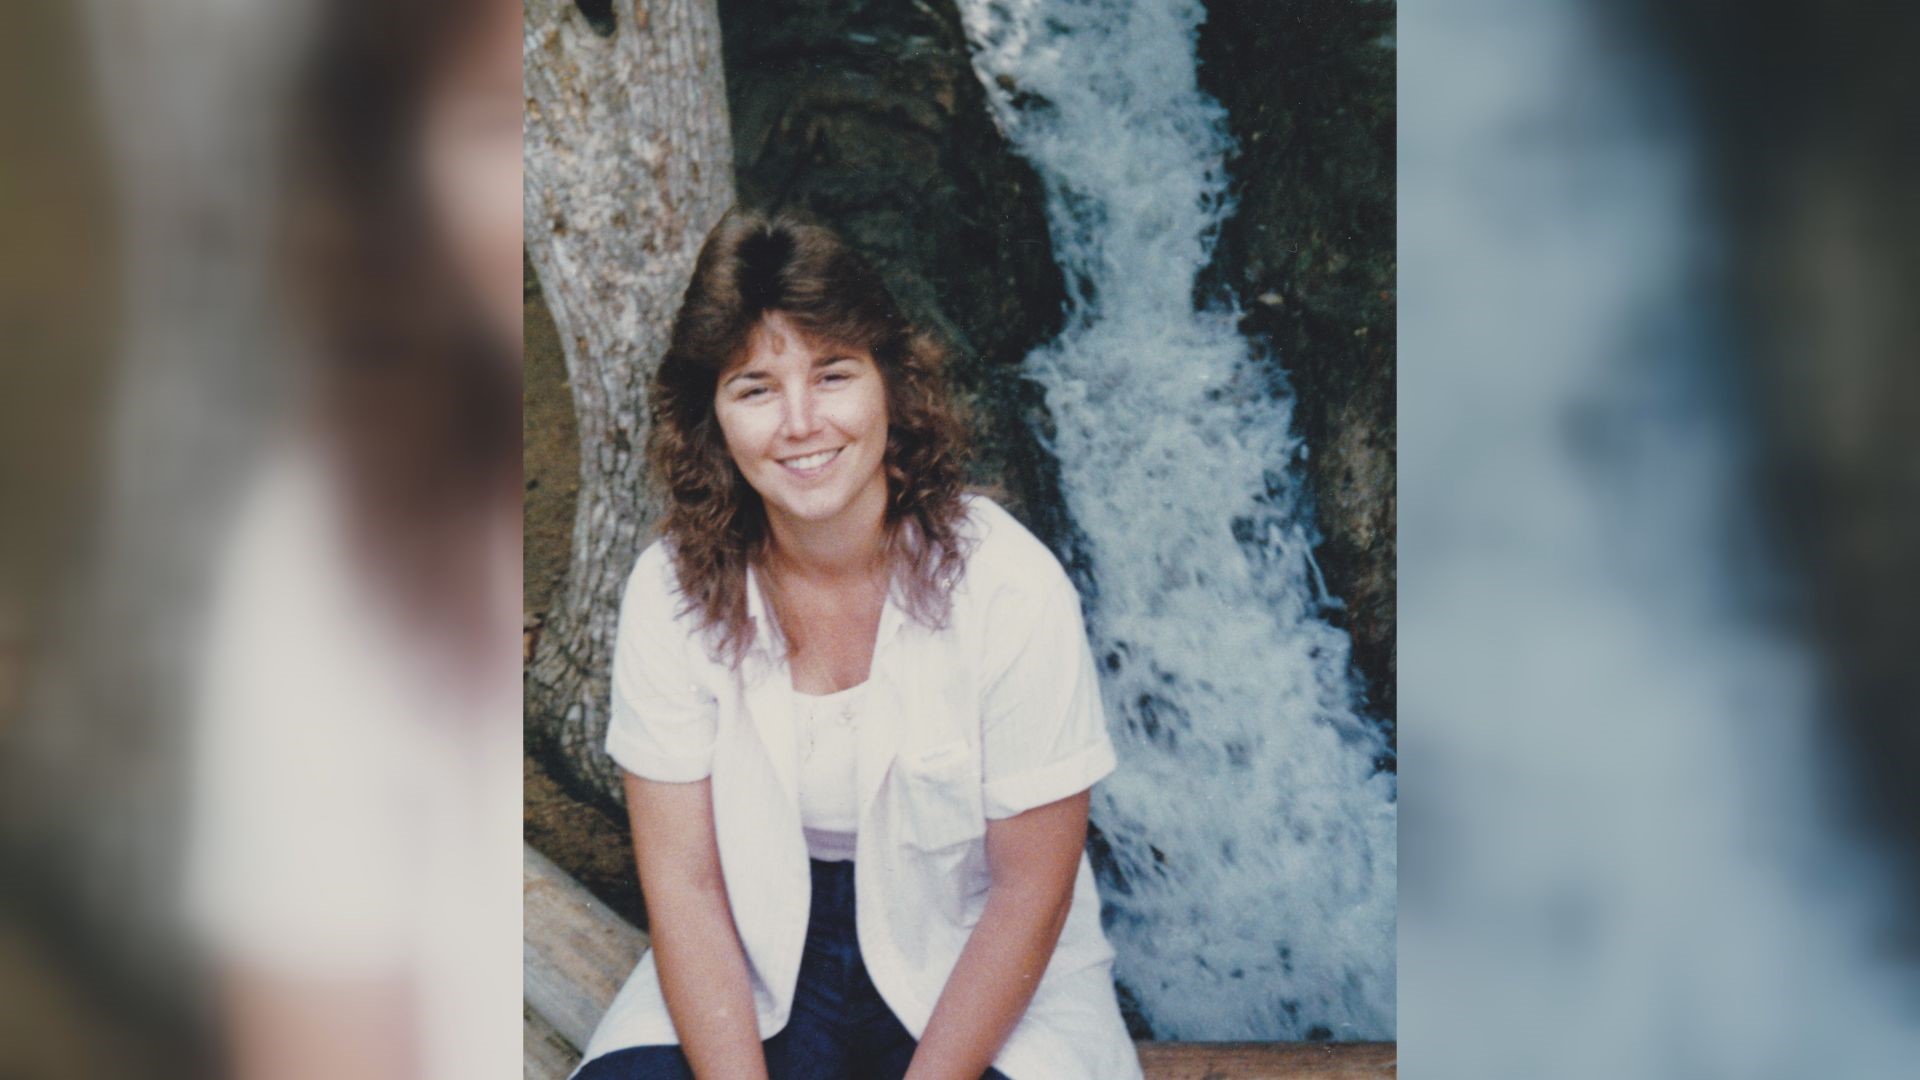 Cynthia Kempf was shot and killed by a former police officer in 1988. Her killer, Eric Bergen, was recently denied parole.